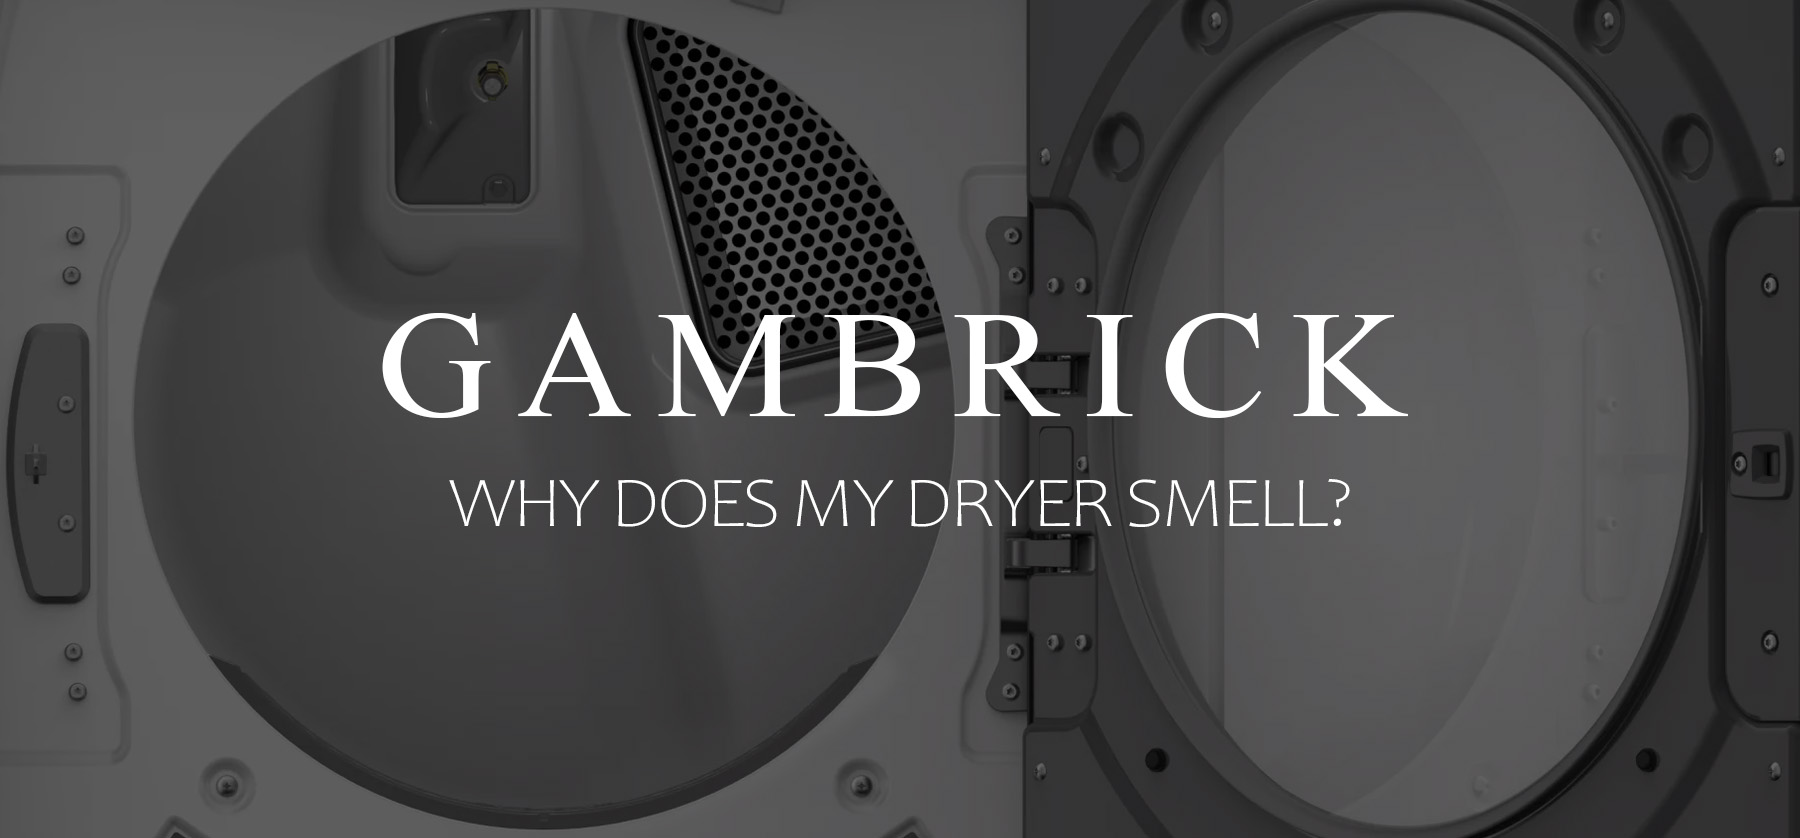 why does my dryer smell banner 1.0